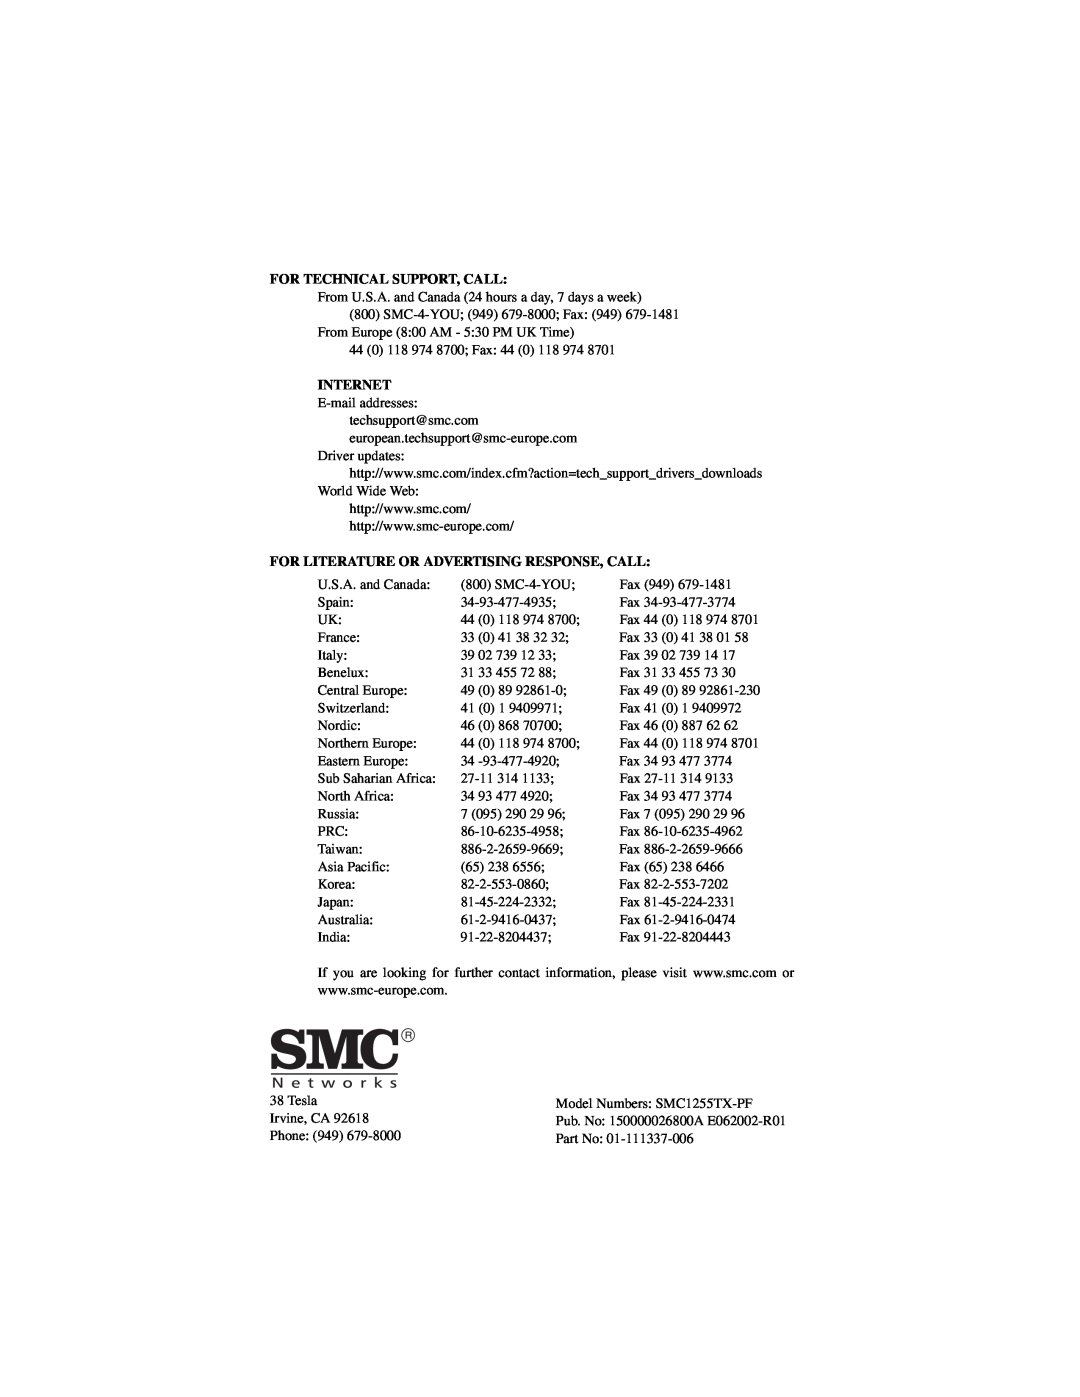 SMC Networks 10/100 Mbps manual For Technical Support, Call, Internet, For Literature Or Advertising Response, Call 